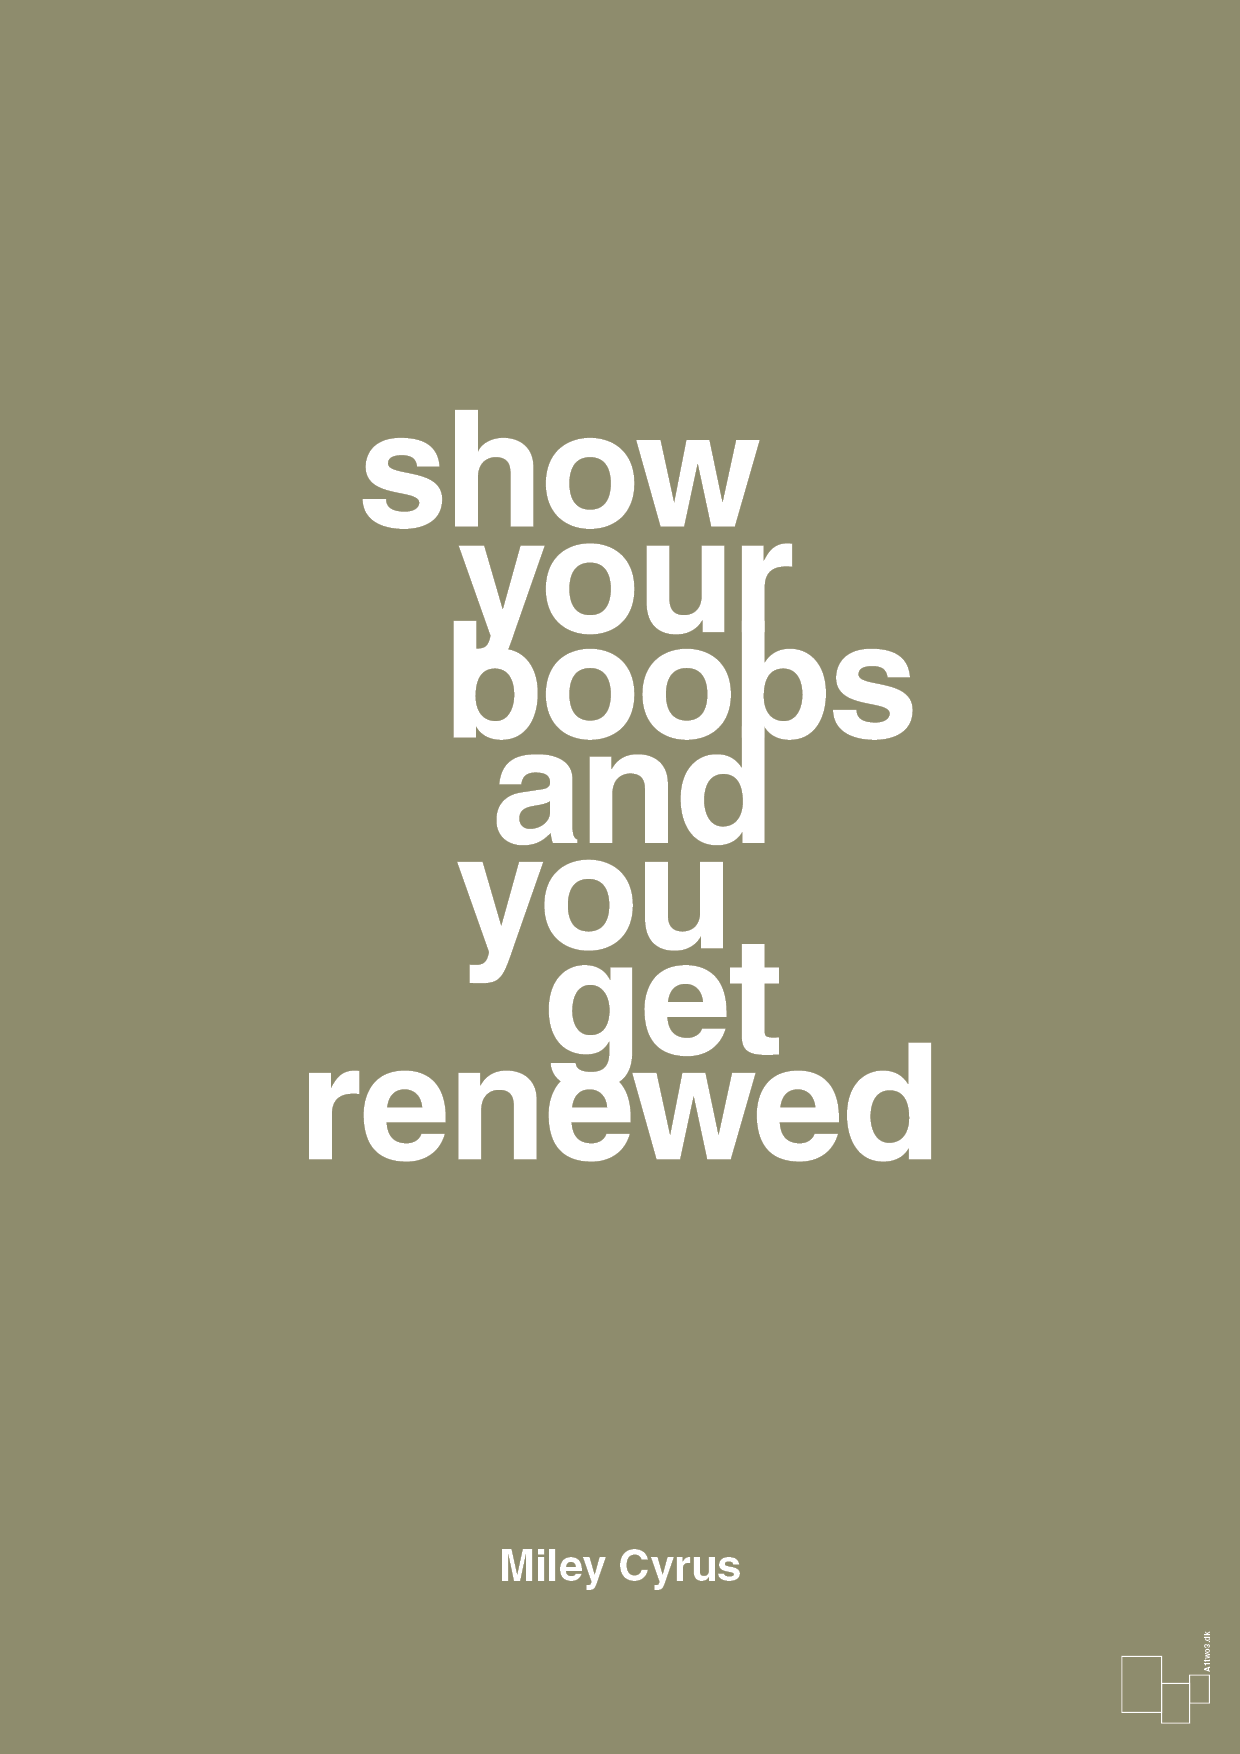 show your boobs and you get renewed - Plakat med Citater i Misty Forrest